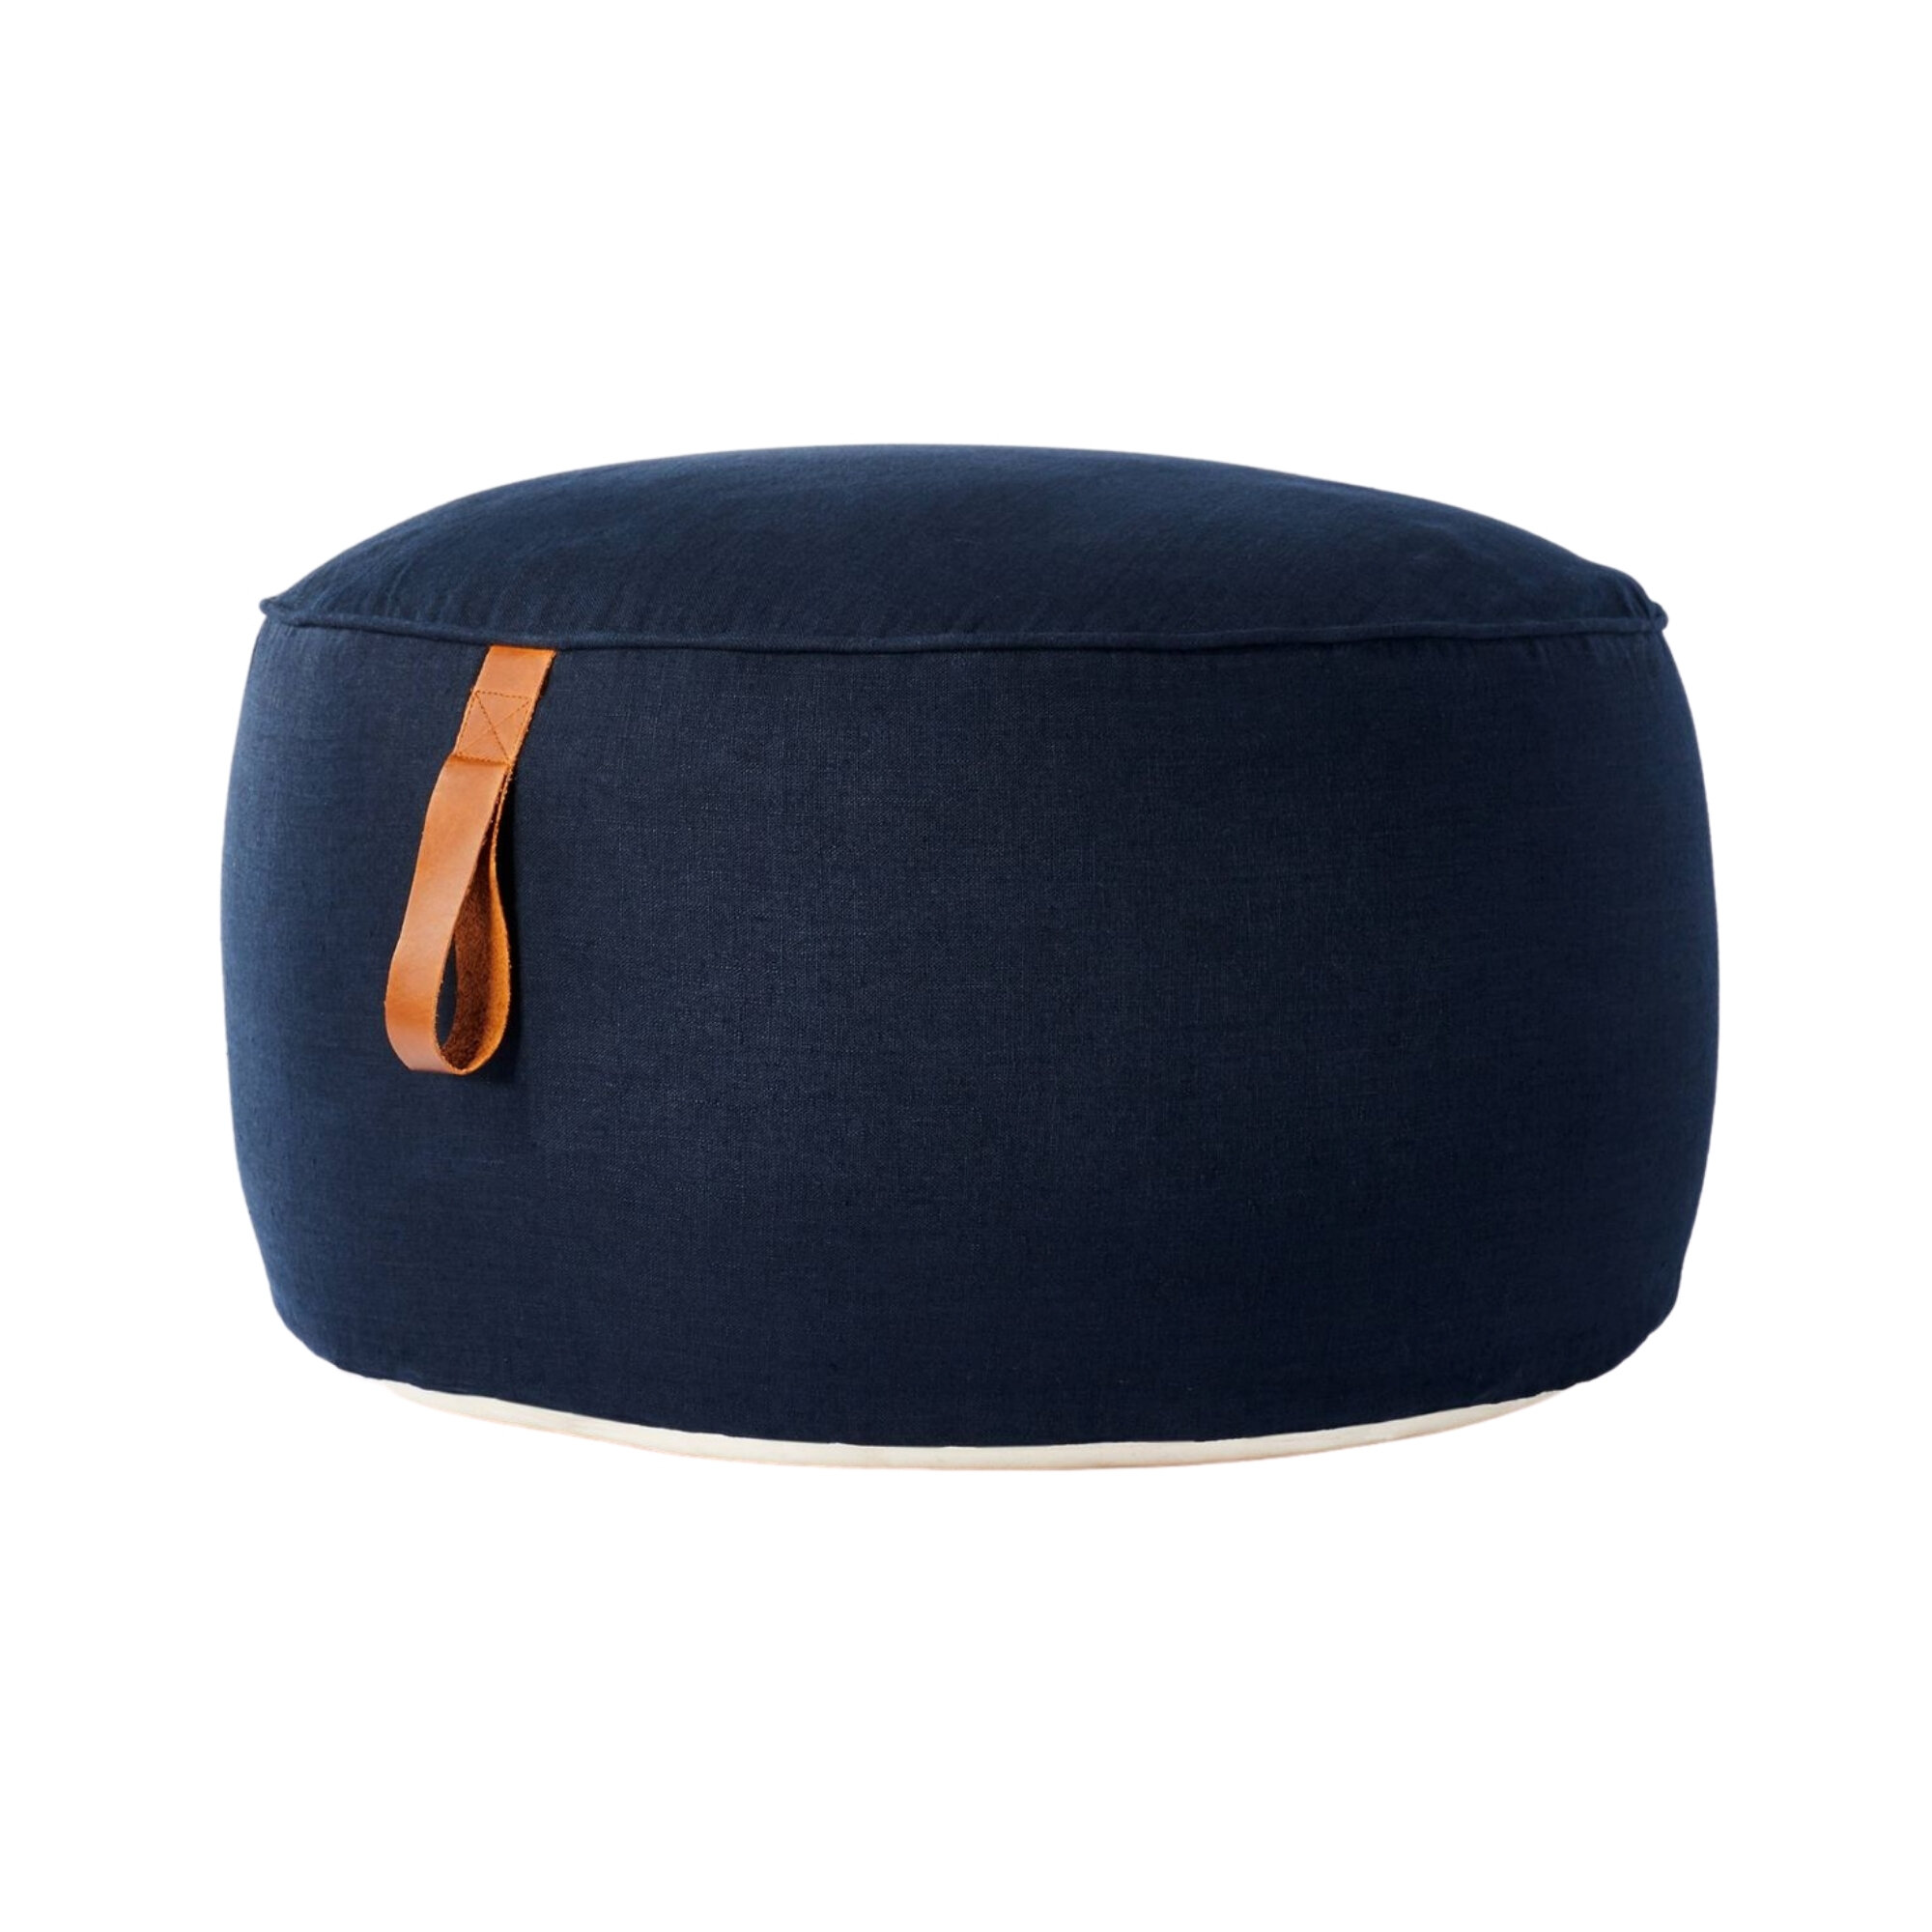 Pouf with Leather Handle, $69